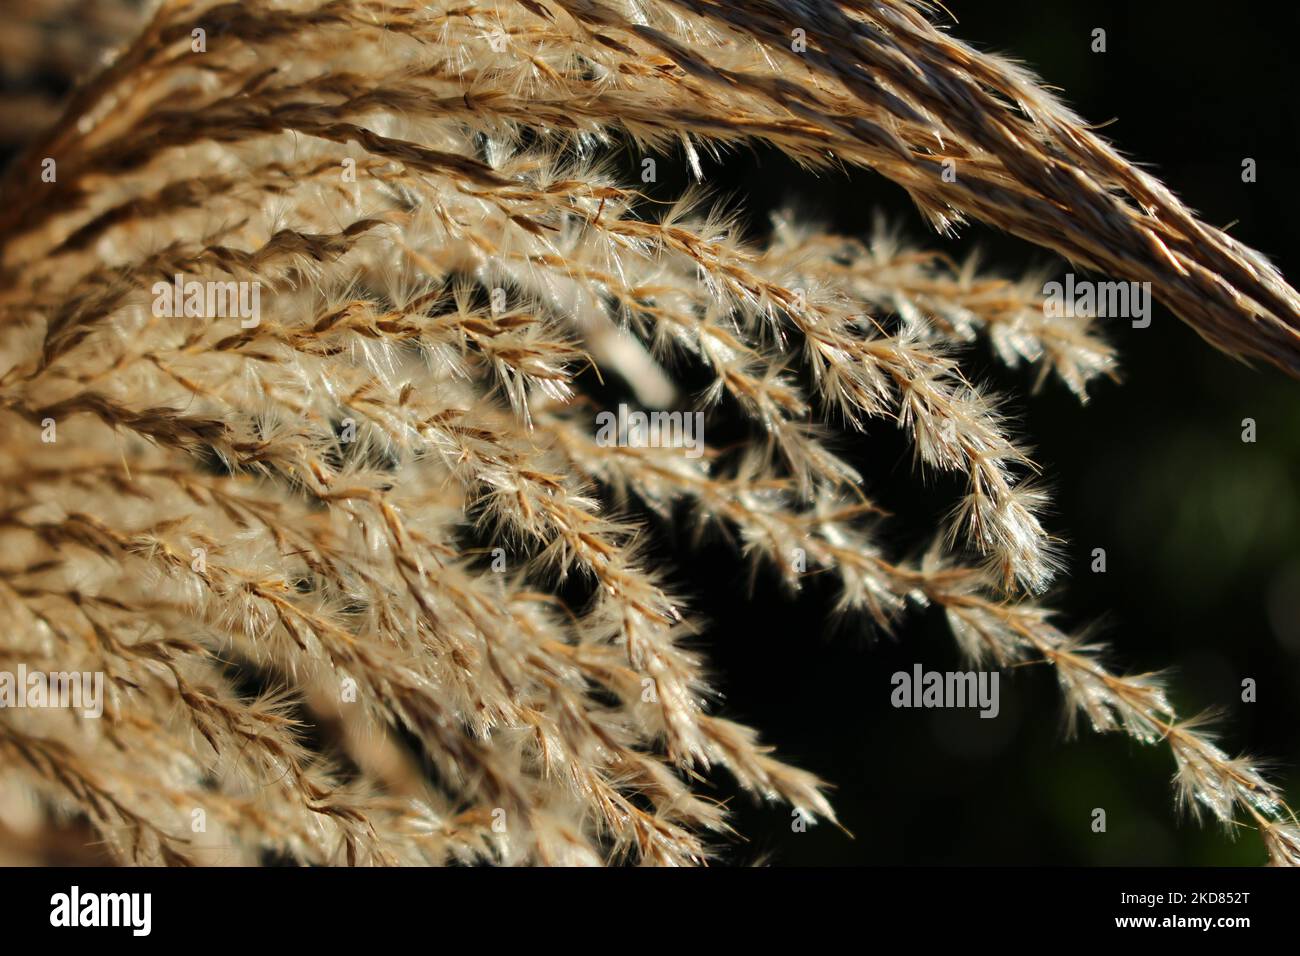 Stalks of mature tall Feather Reed Grass backlit by the sun with dark background. Ornamental grasses in autumn background (Calamagrostis acutiflora) Stock Photo